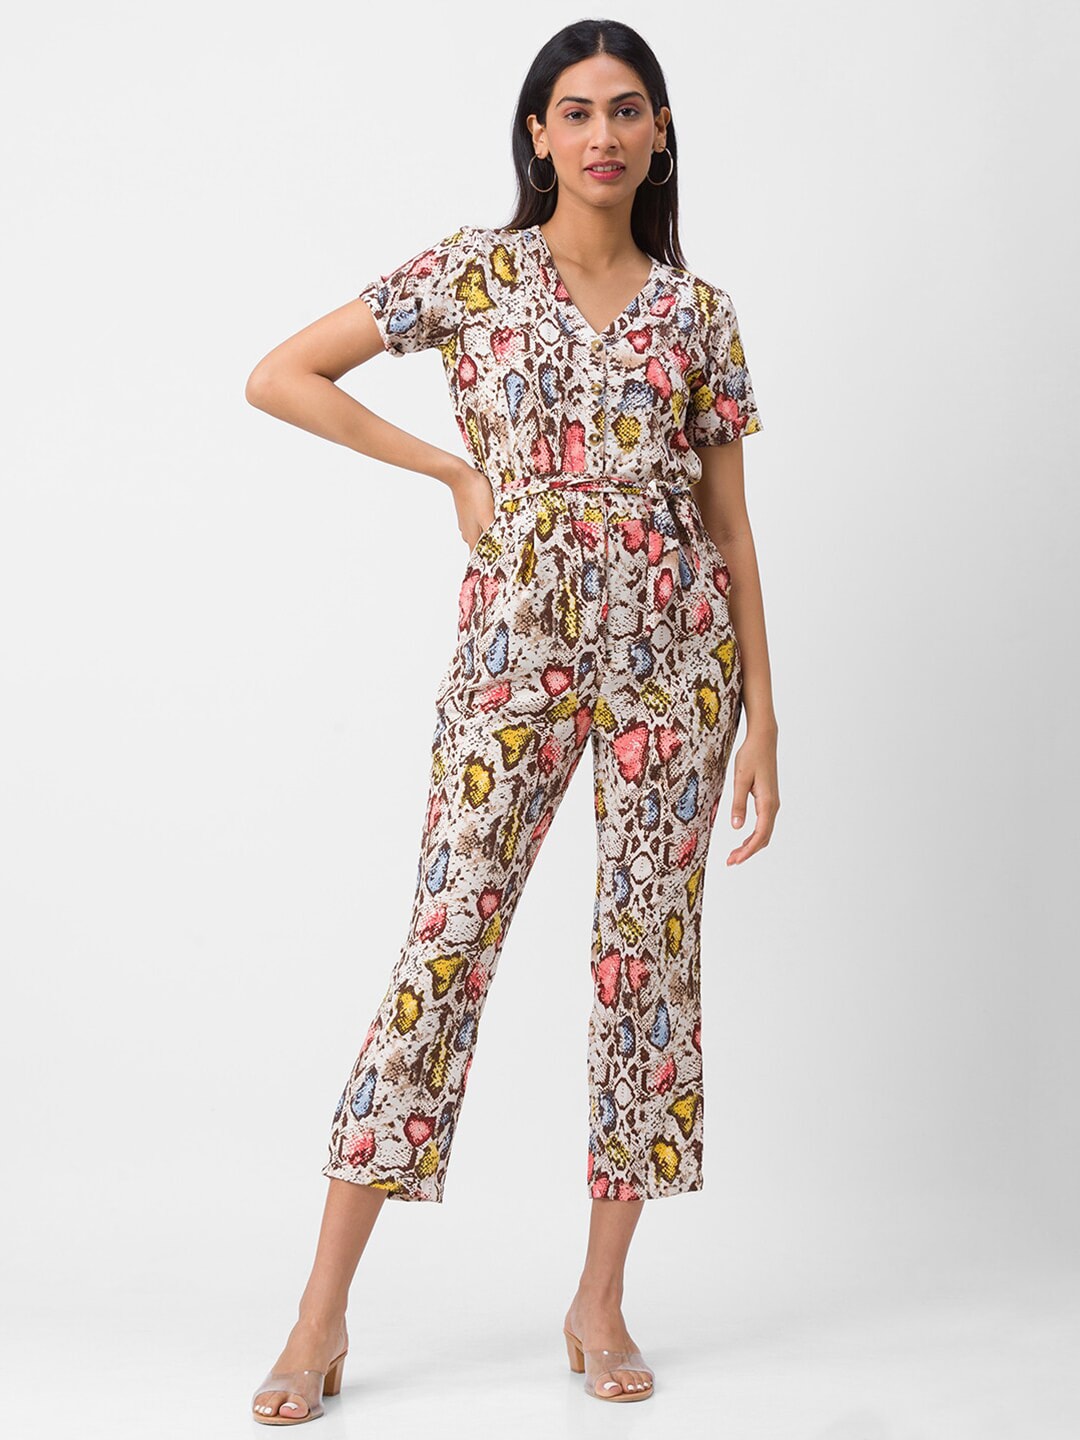 Globus Off White & Yellow Printed Basic Jumpsuit Price in India